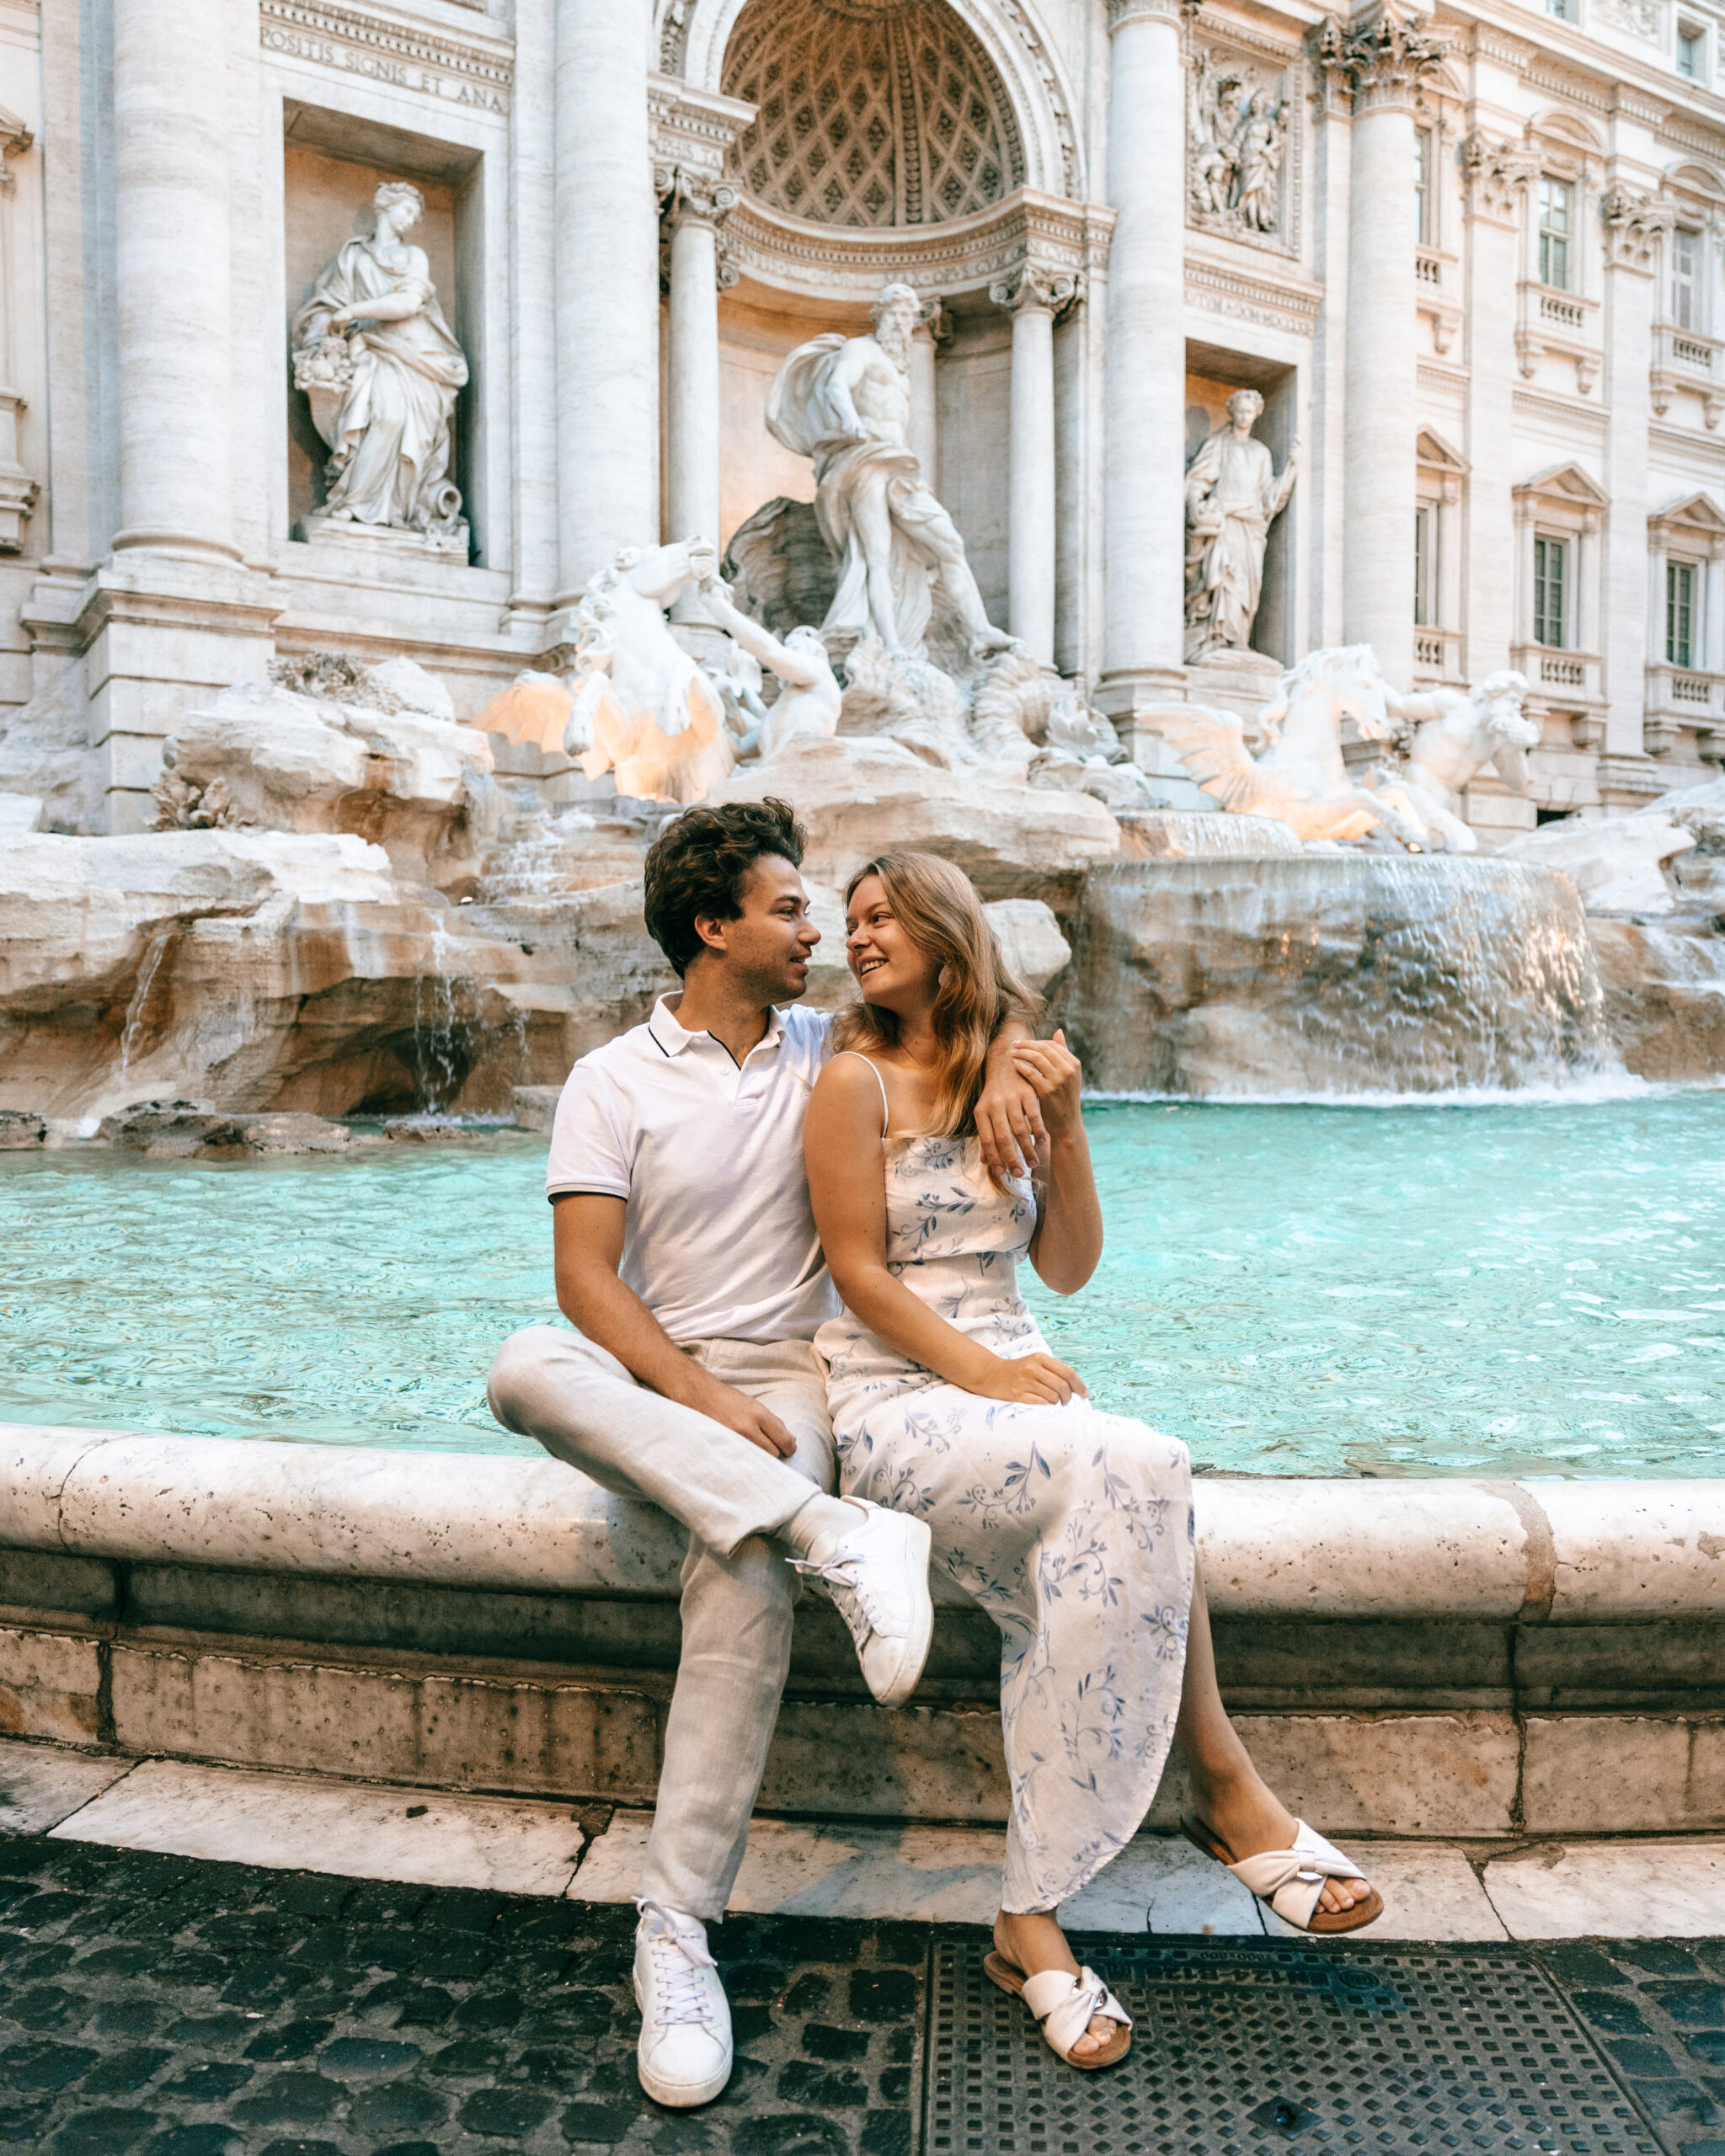 Lukas and Lore sitting at the Trevi Fountain in Rome